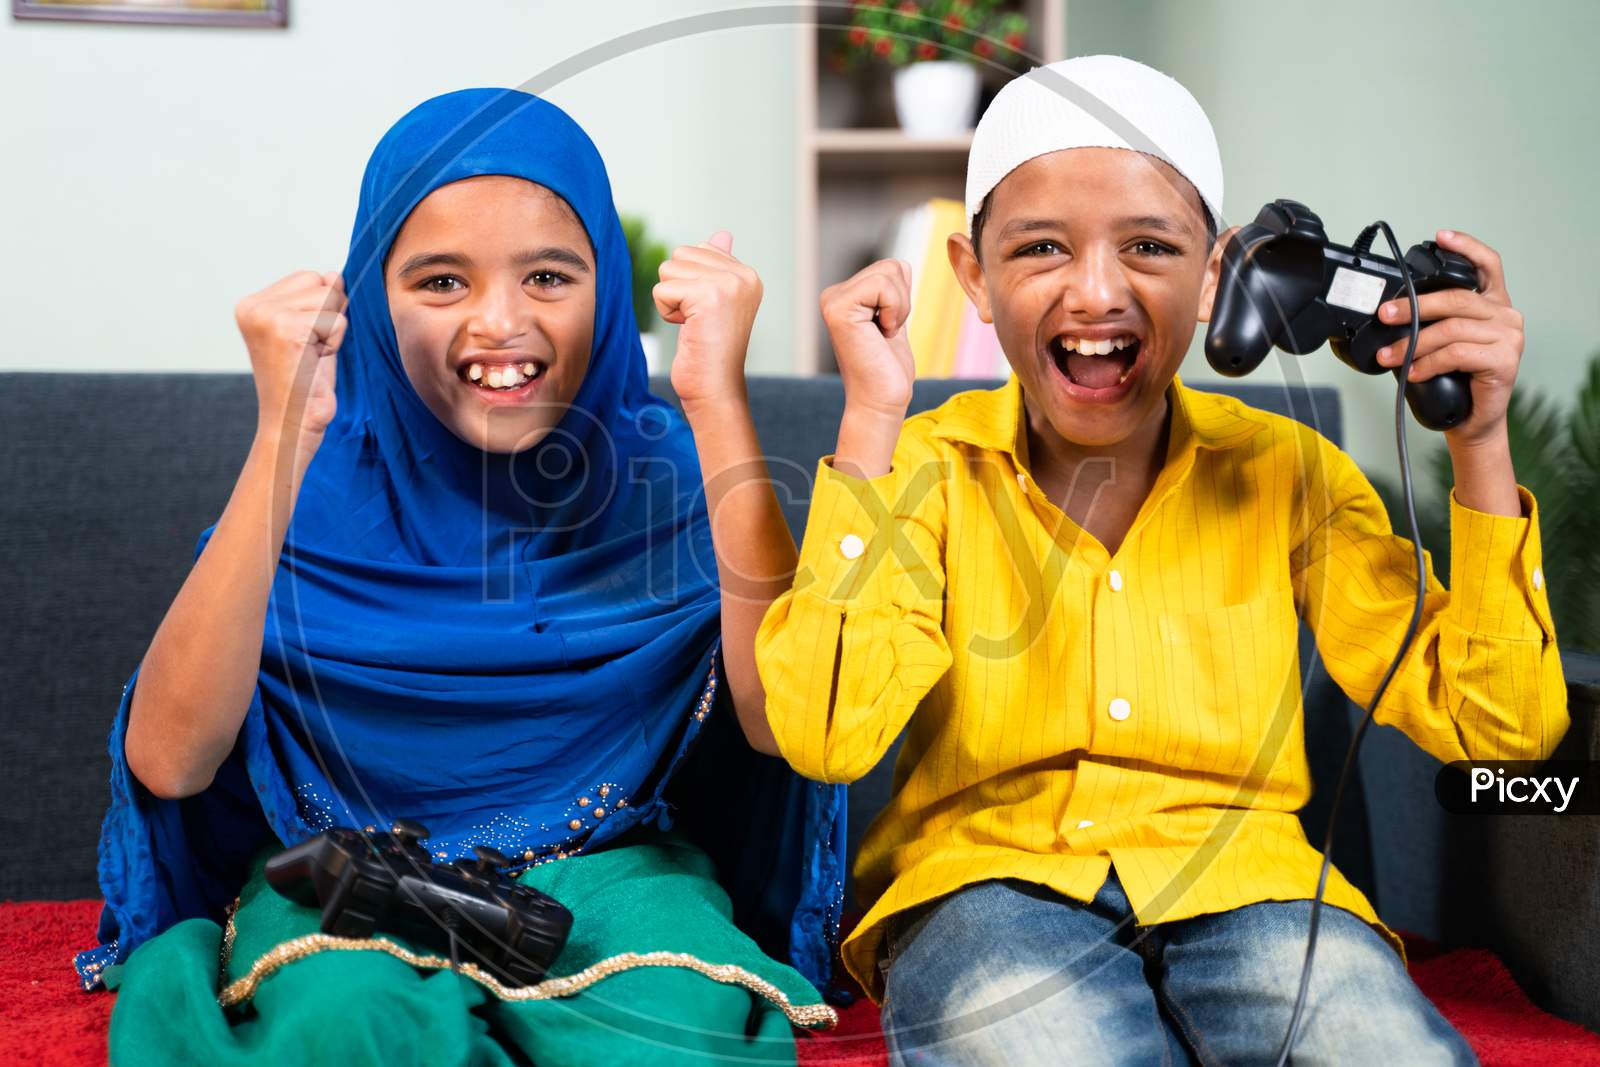 Point Of View Shot, Two Muslim Kids Cheering And Shouting After Won The Online Video Game While Playing With Joystick Or Gamepad At Home Sitting On Sofa.